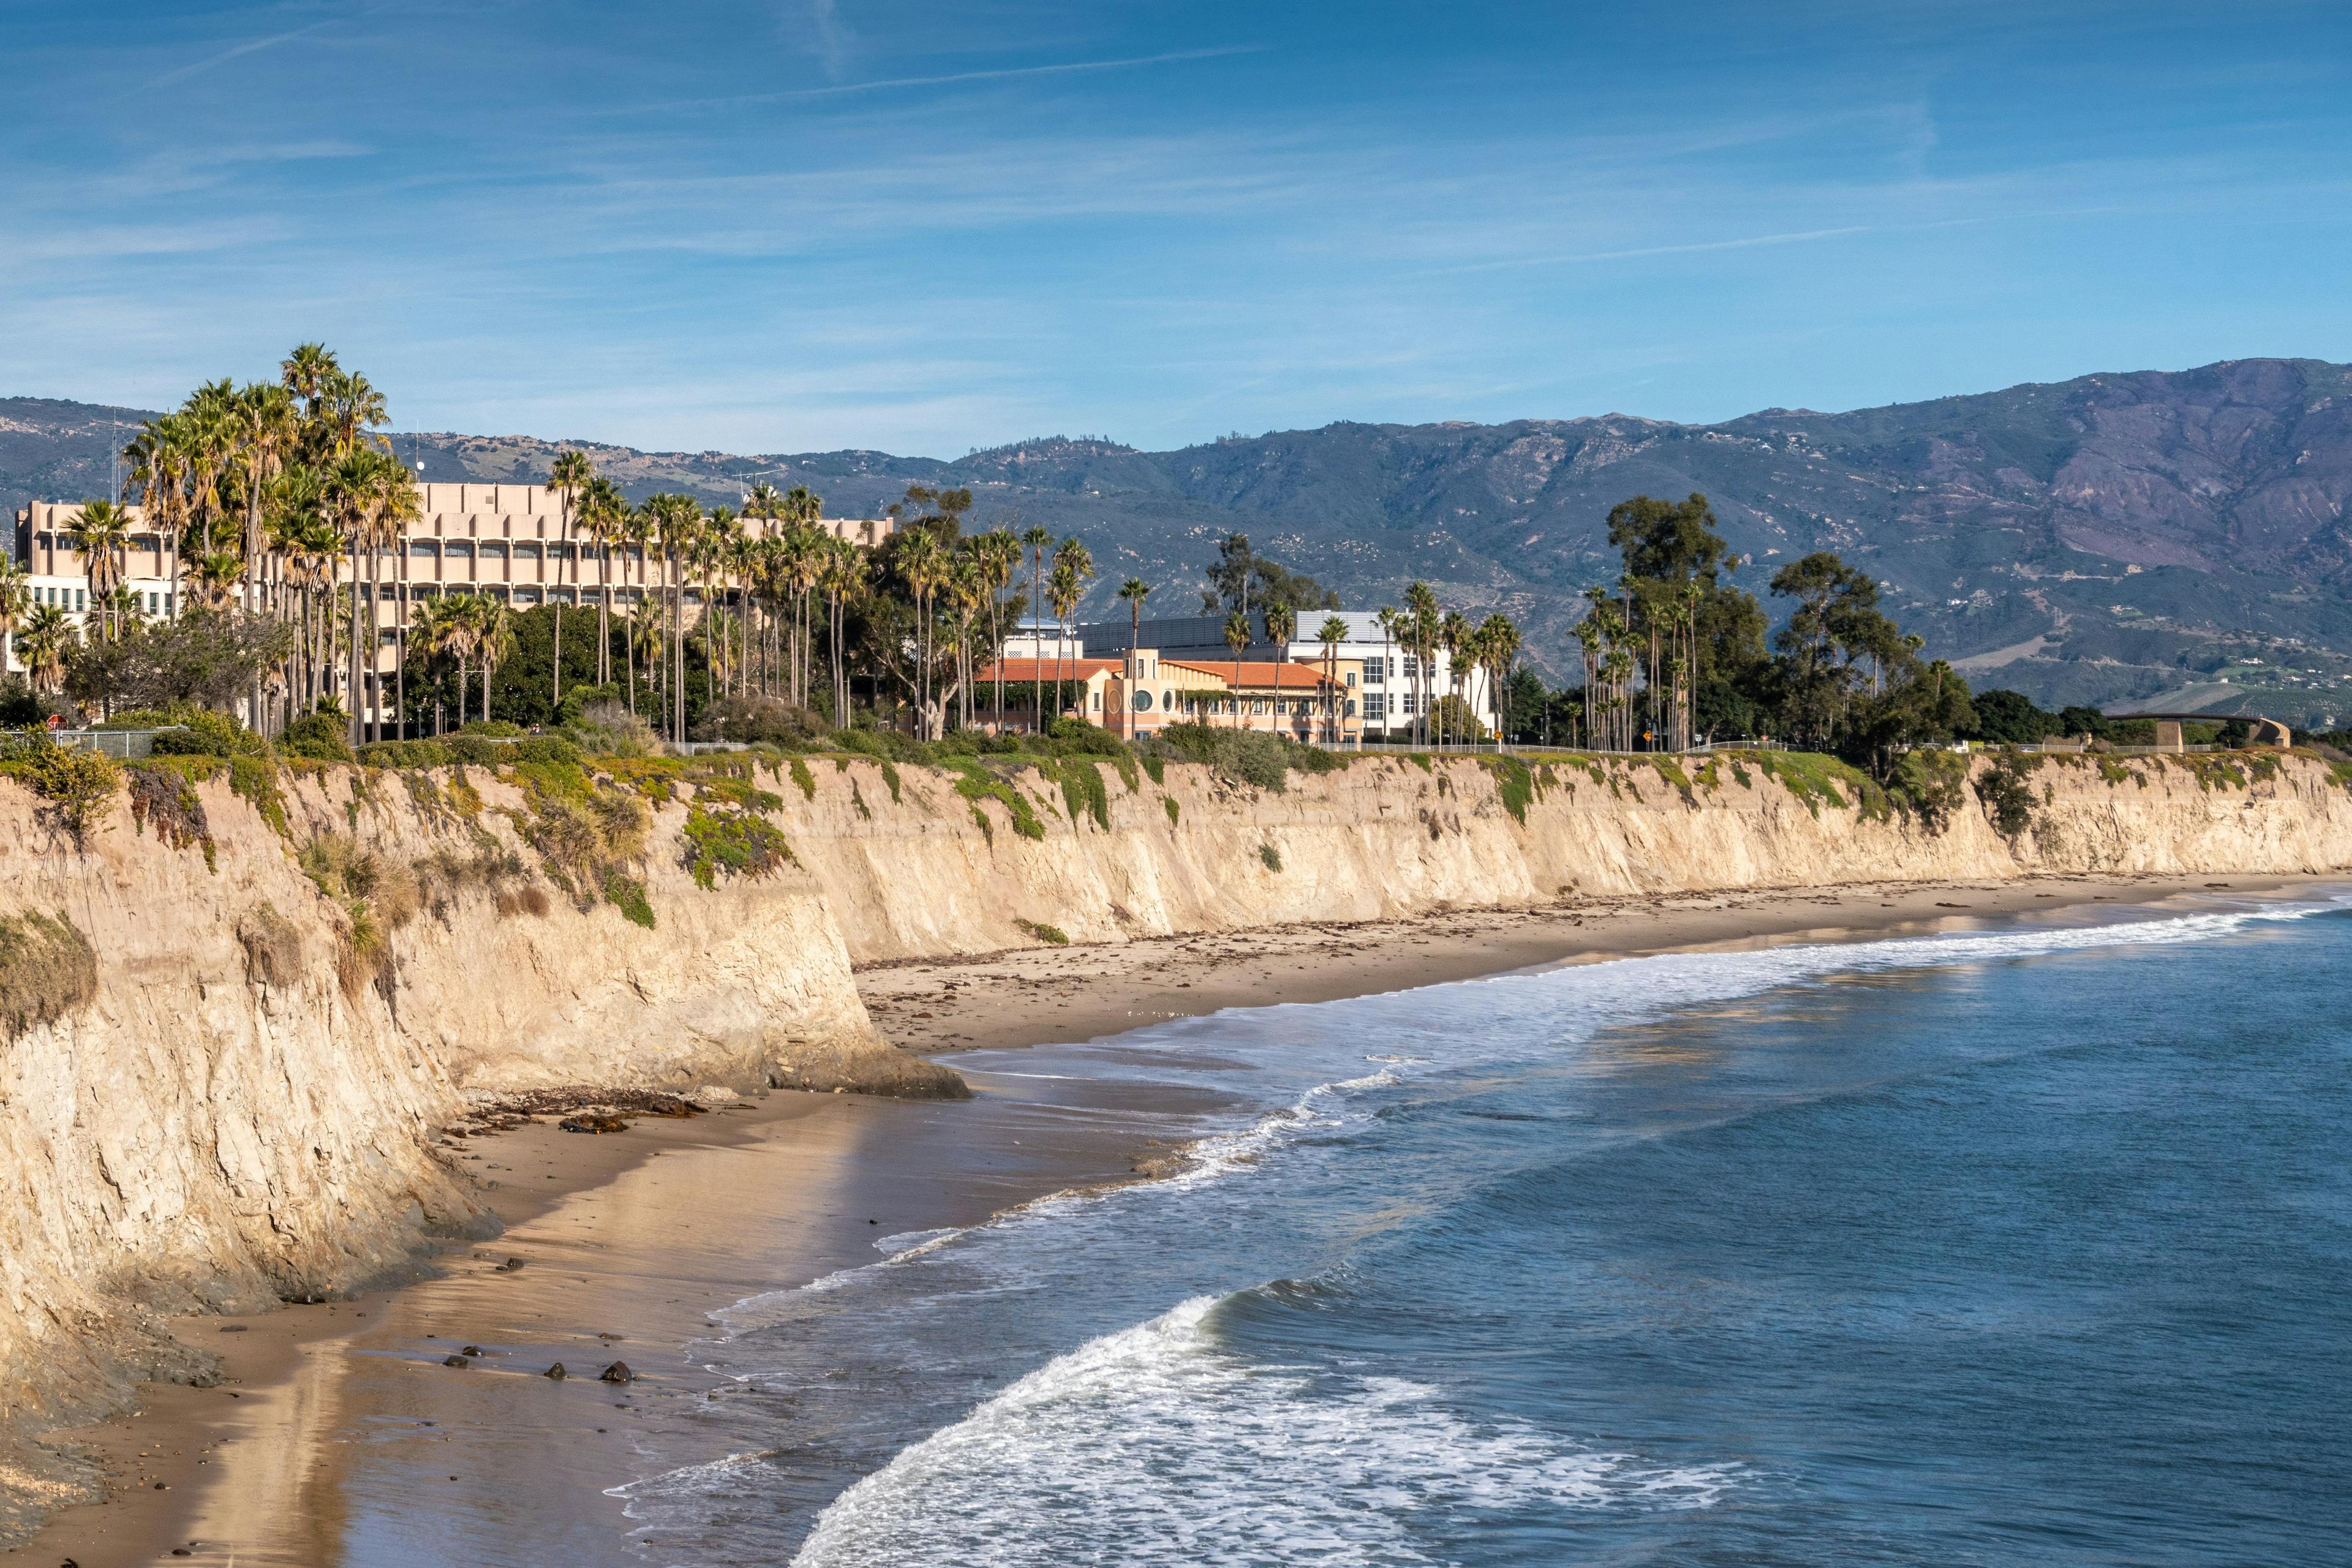 UCSB, University California Santa Barbara. East side beige cliffs in front of several buildings. Blue ocean in front. Green foliage around. Hills on horizon and blue | Image Credit: © Klodien – stock.adobe.com